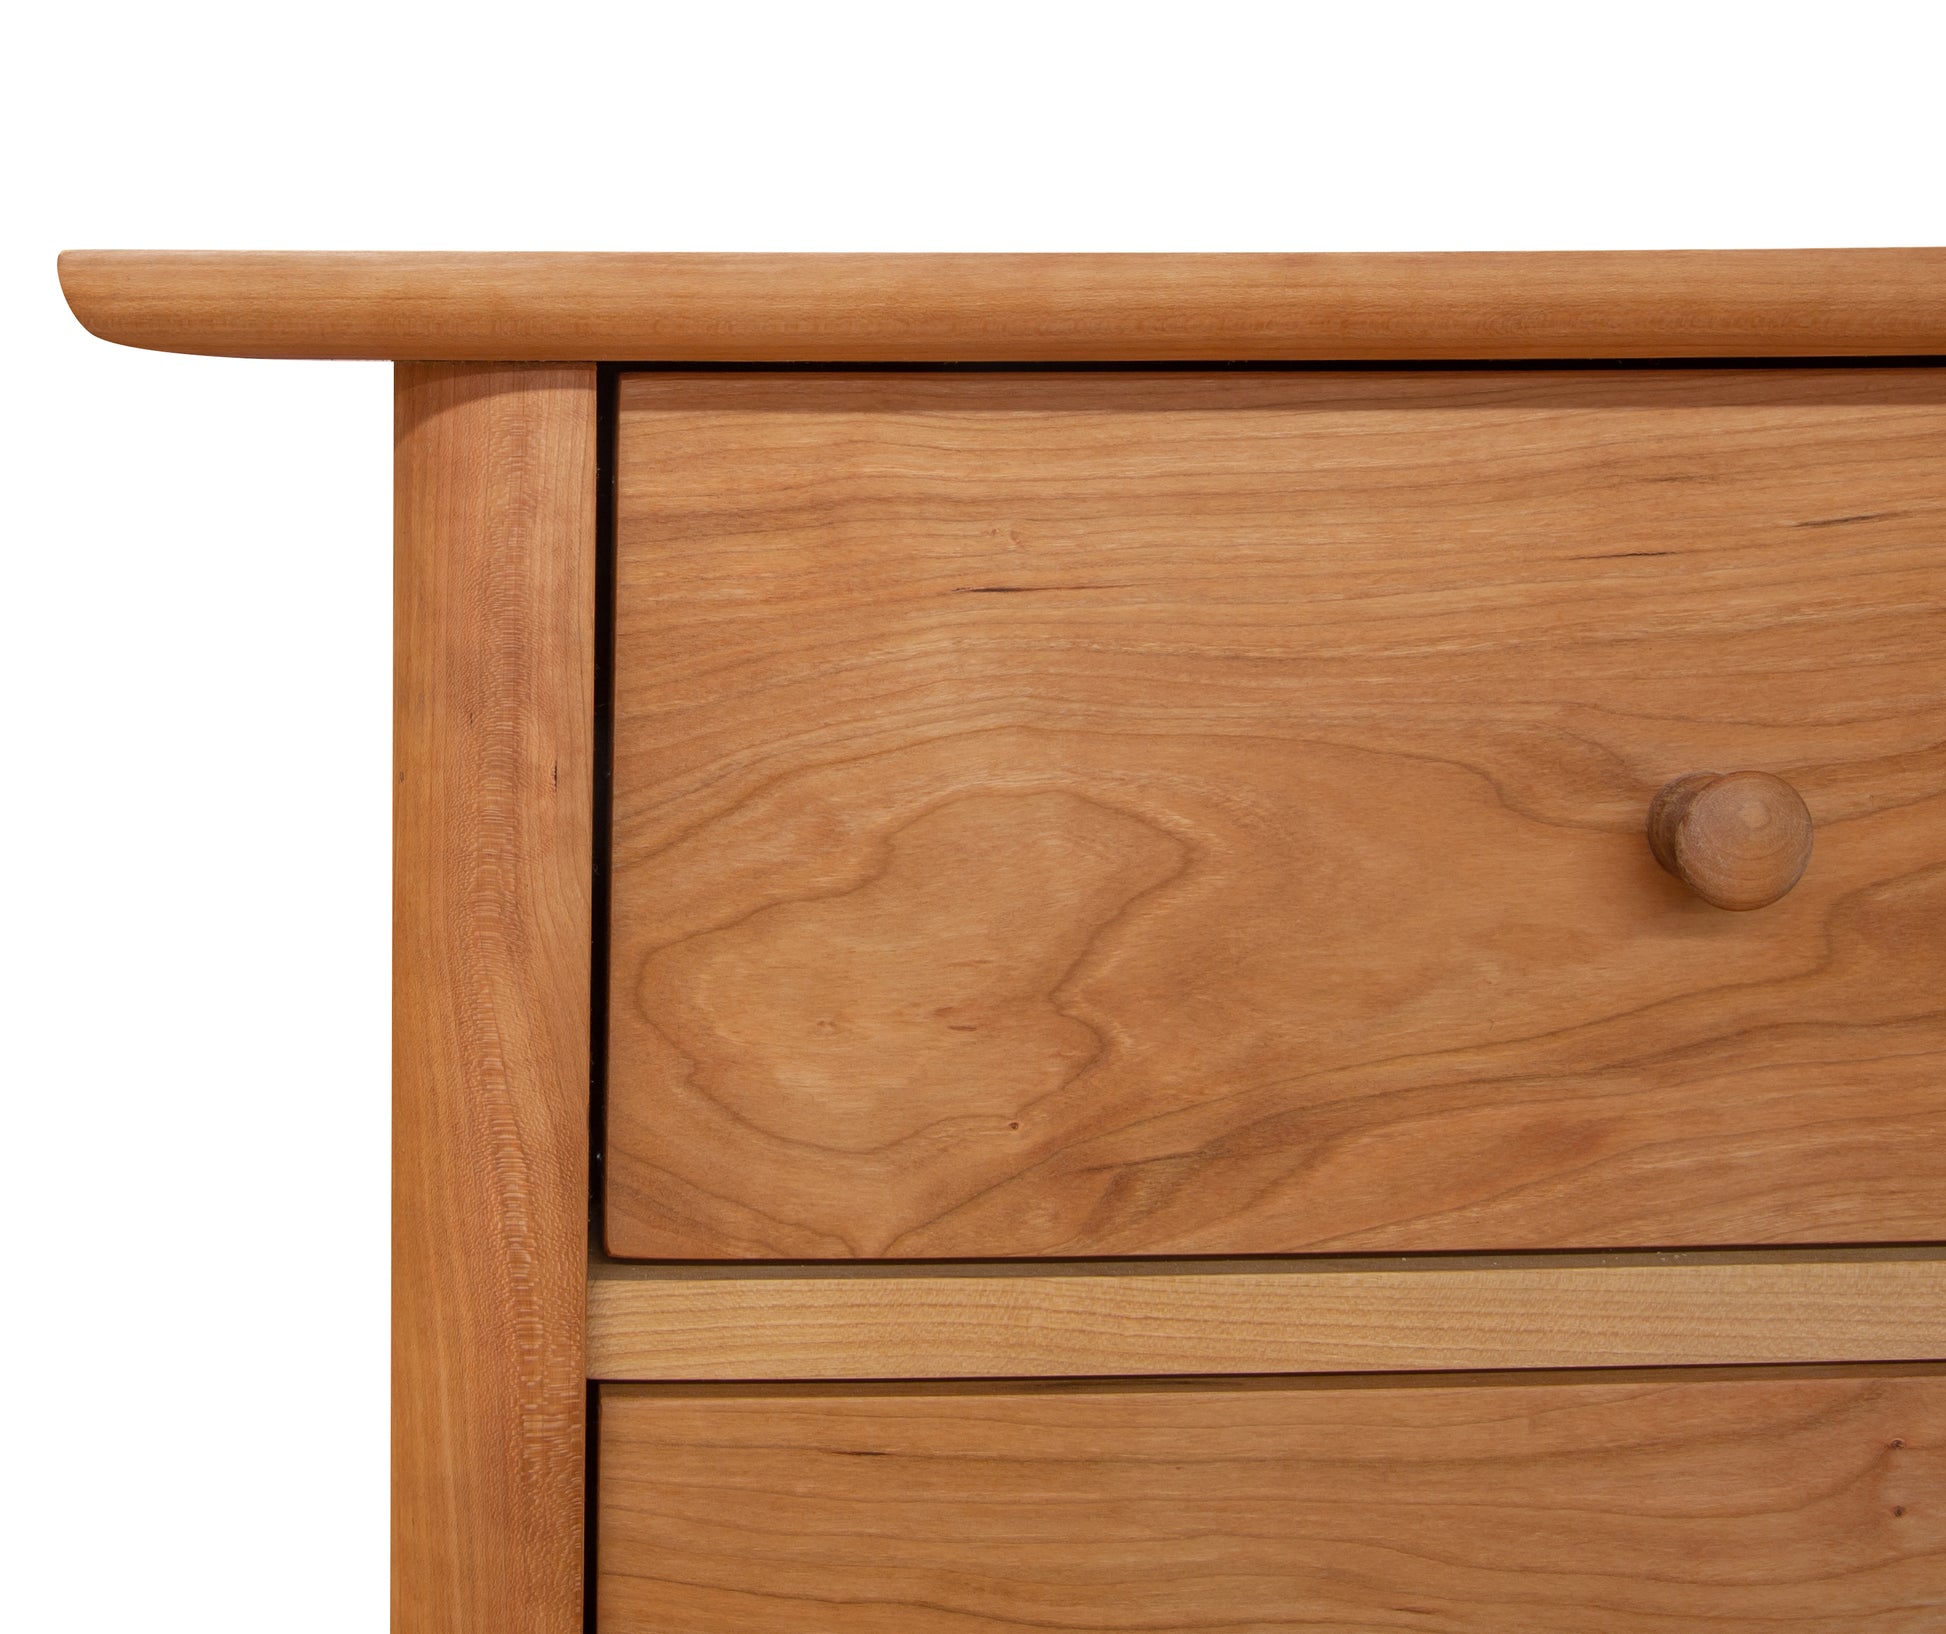 Close-up of a Vermont Furniture Designs Heartwood Shaker 4-Drawer Dresser drawer with a round knob, displaying natural wood grain patterns, against a white background.